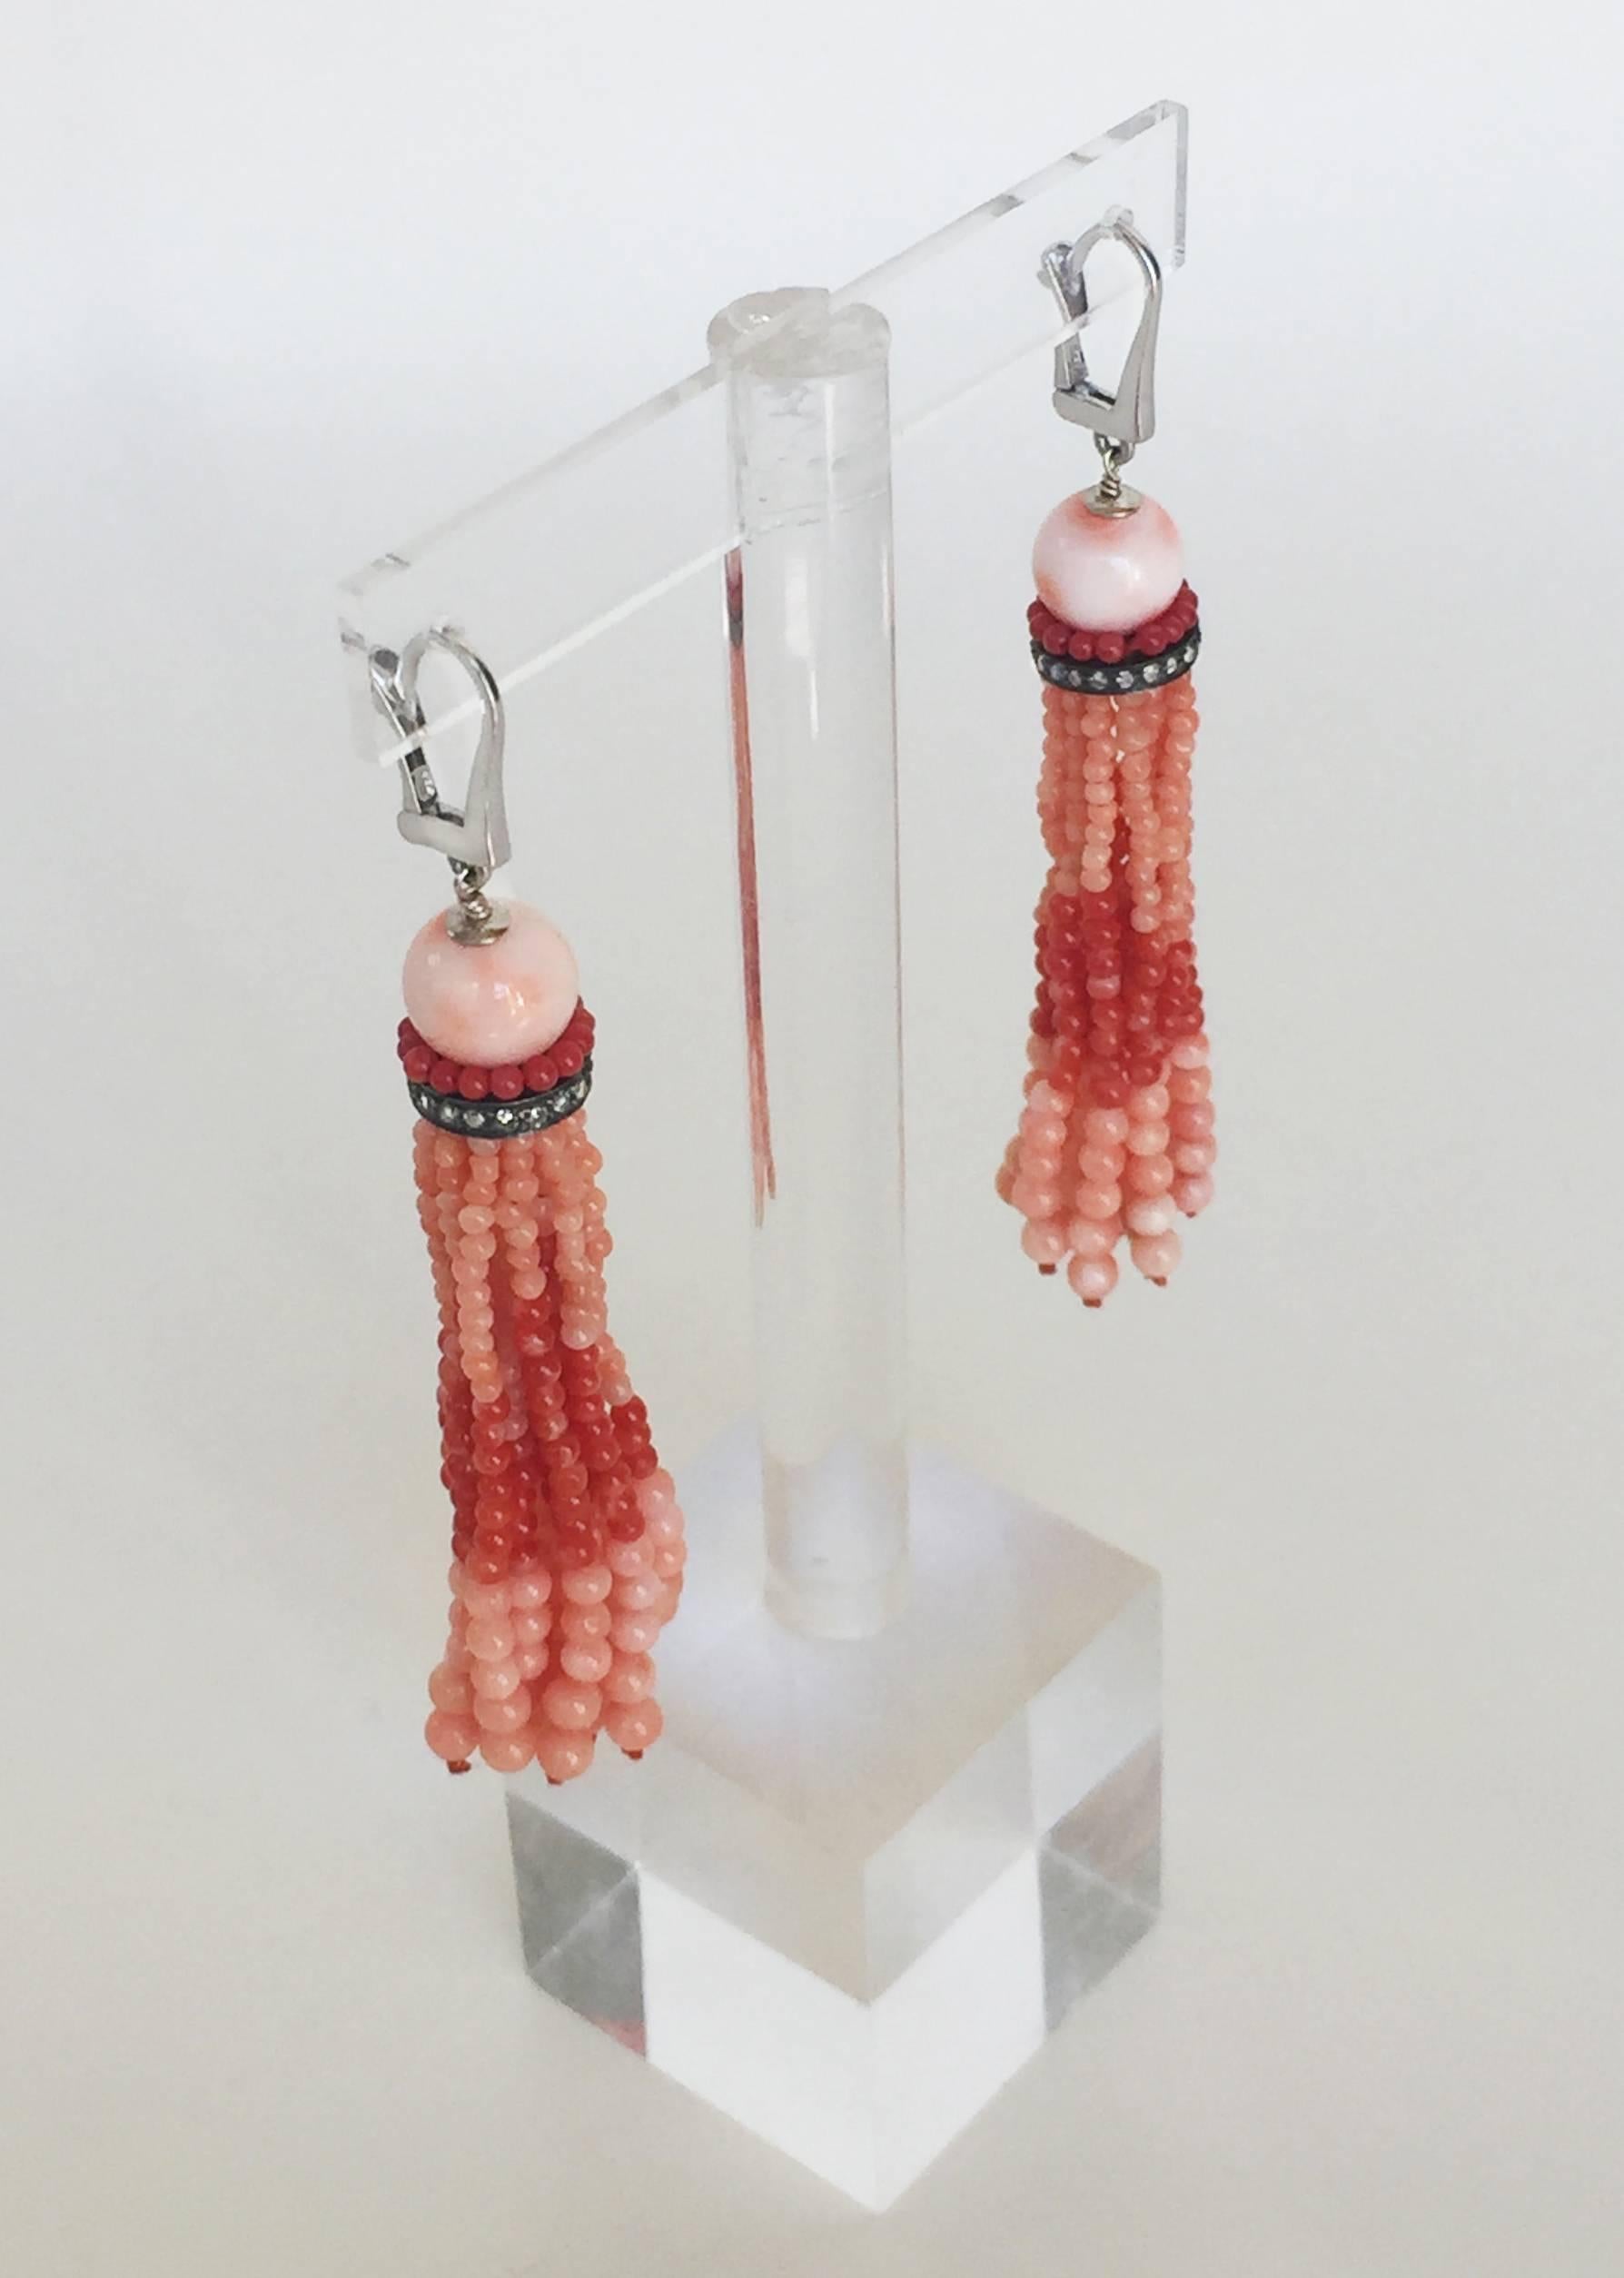 The vibrant tones of pink and red coral makes these tassel earrings a standout piece. A round pink coral bead at the top of the earrings contrasts beautifully with the deep red coral beads and diamond encrusted roundel. The tassel strands are